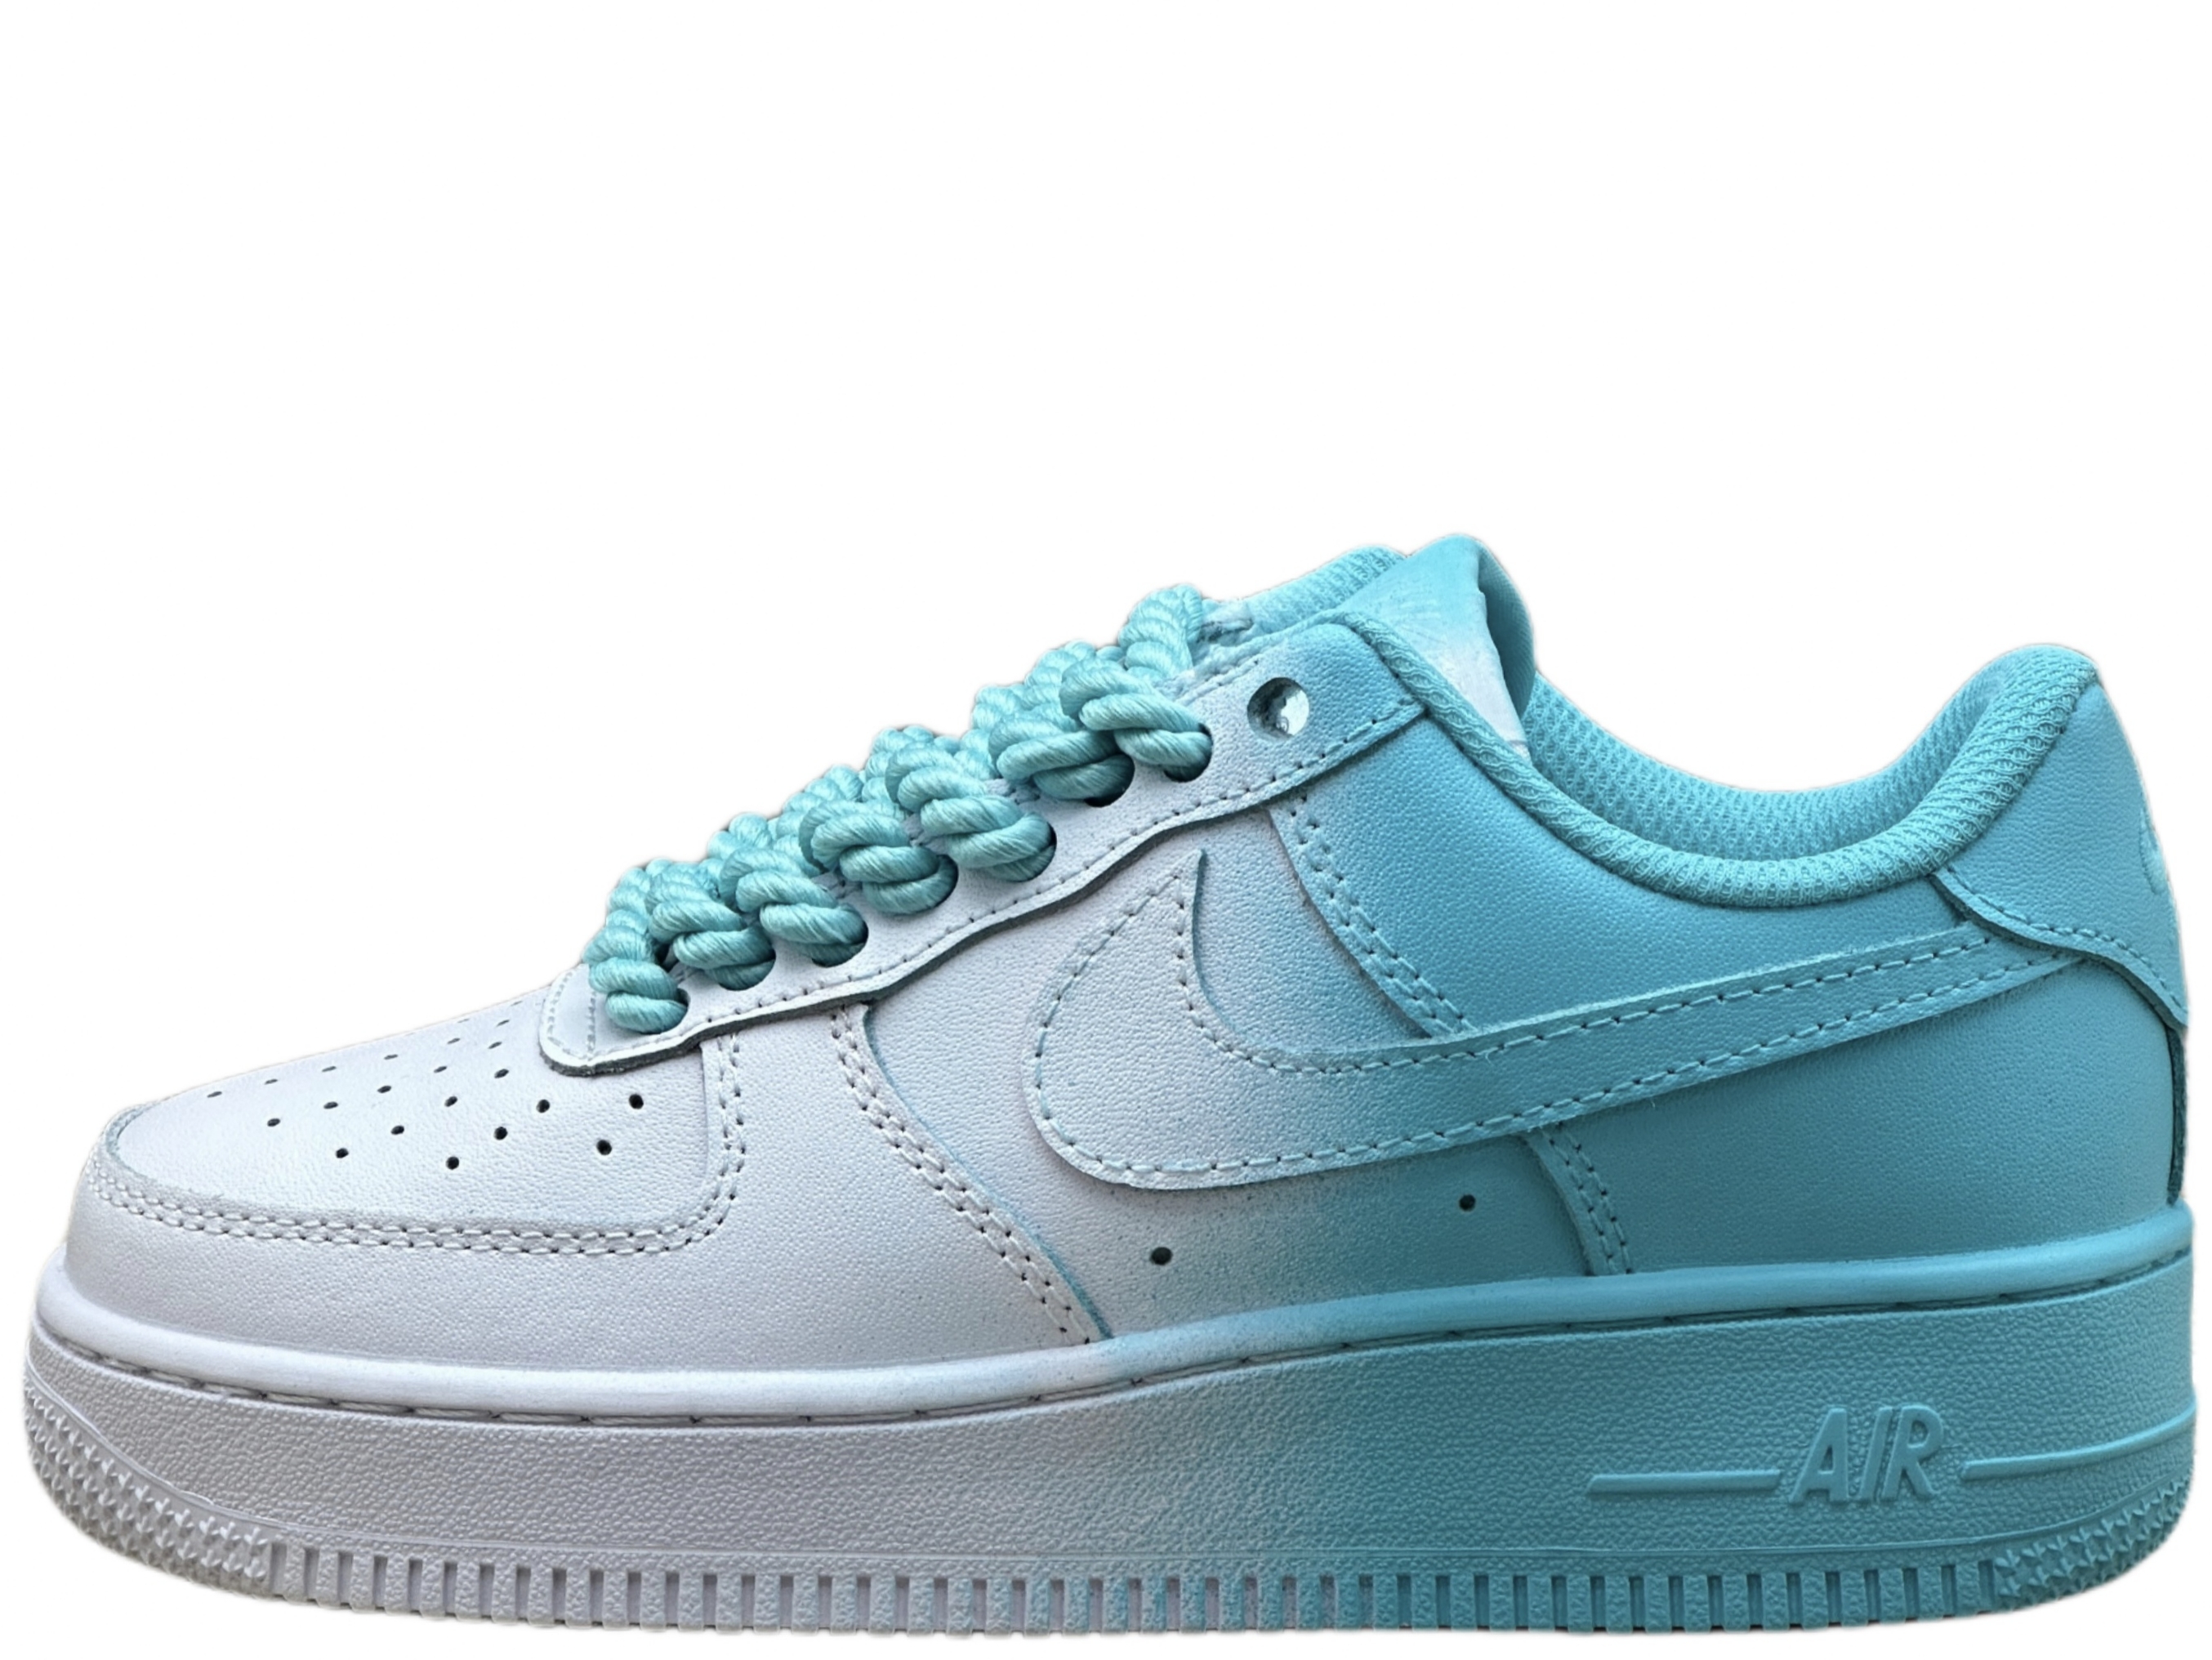  Кроссовки Nike Air Force 1 Low White Blue